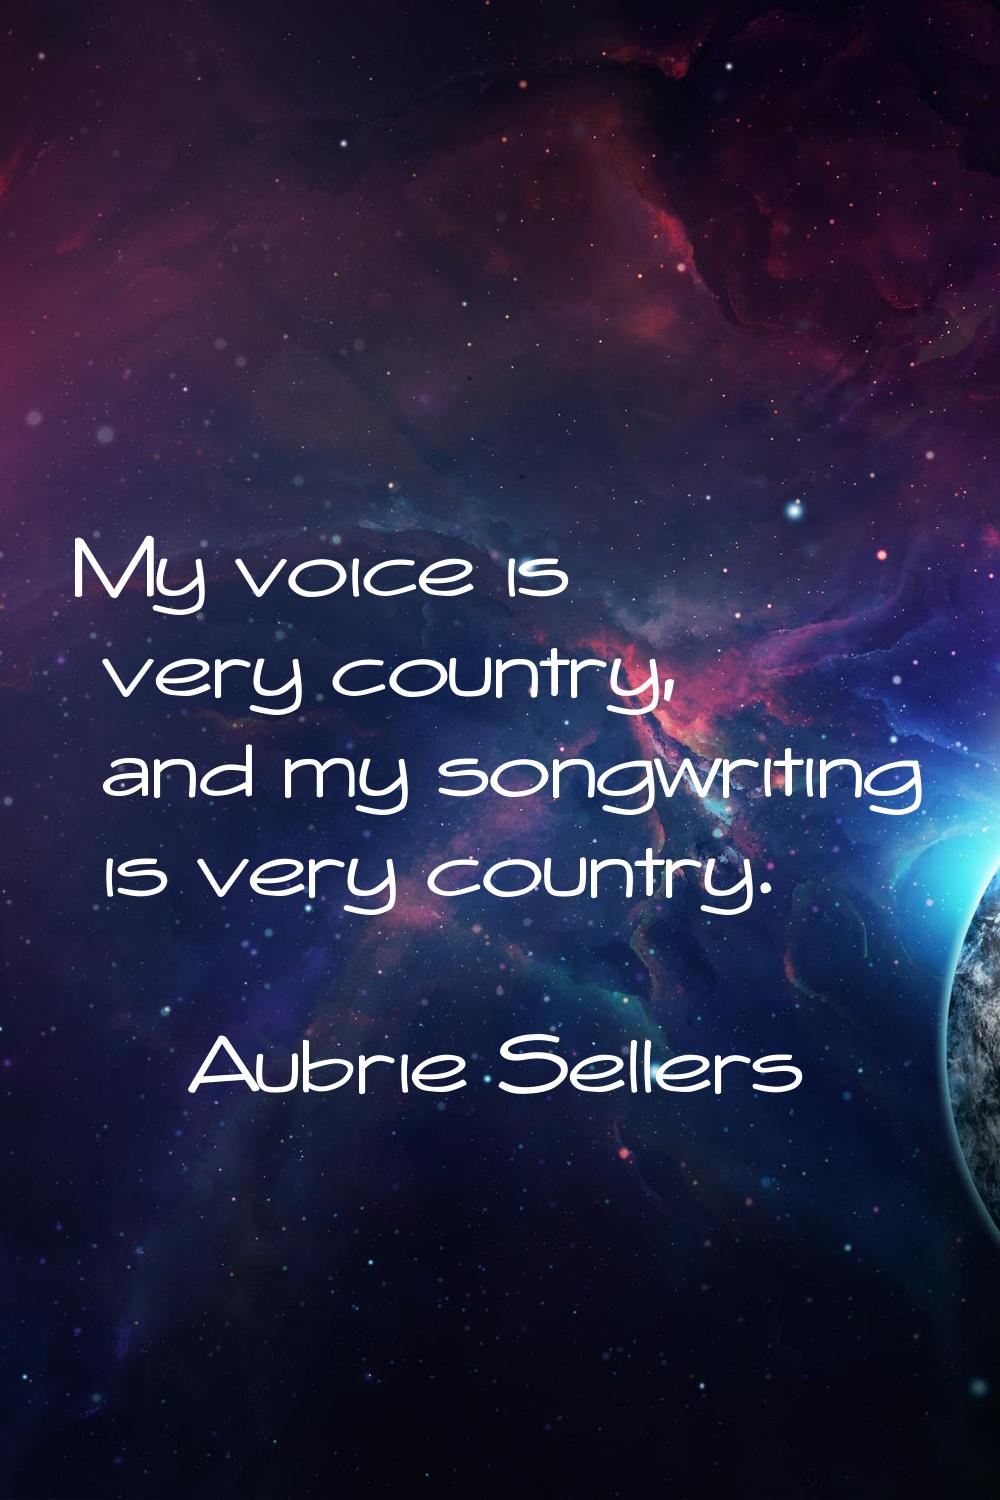 My voice is very country, and my songwriting is very country.